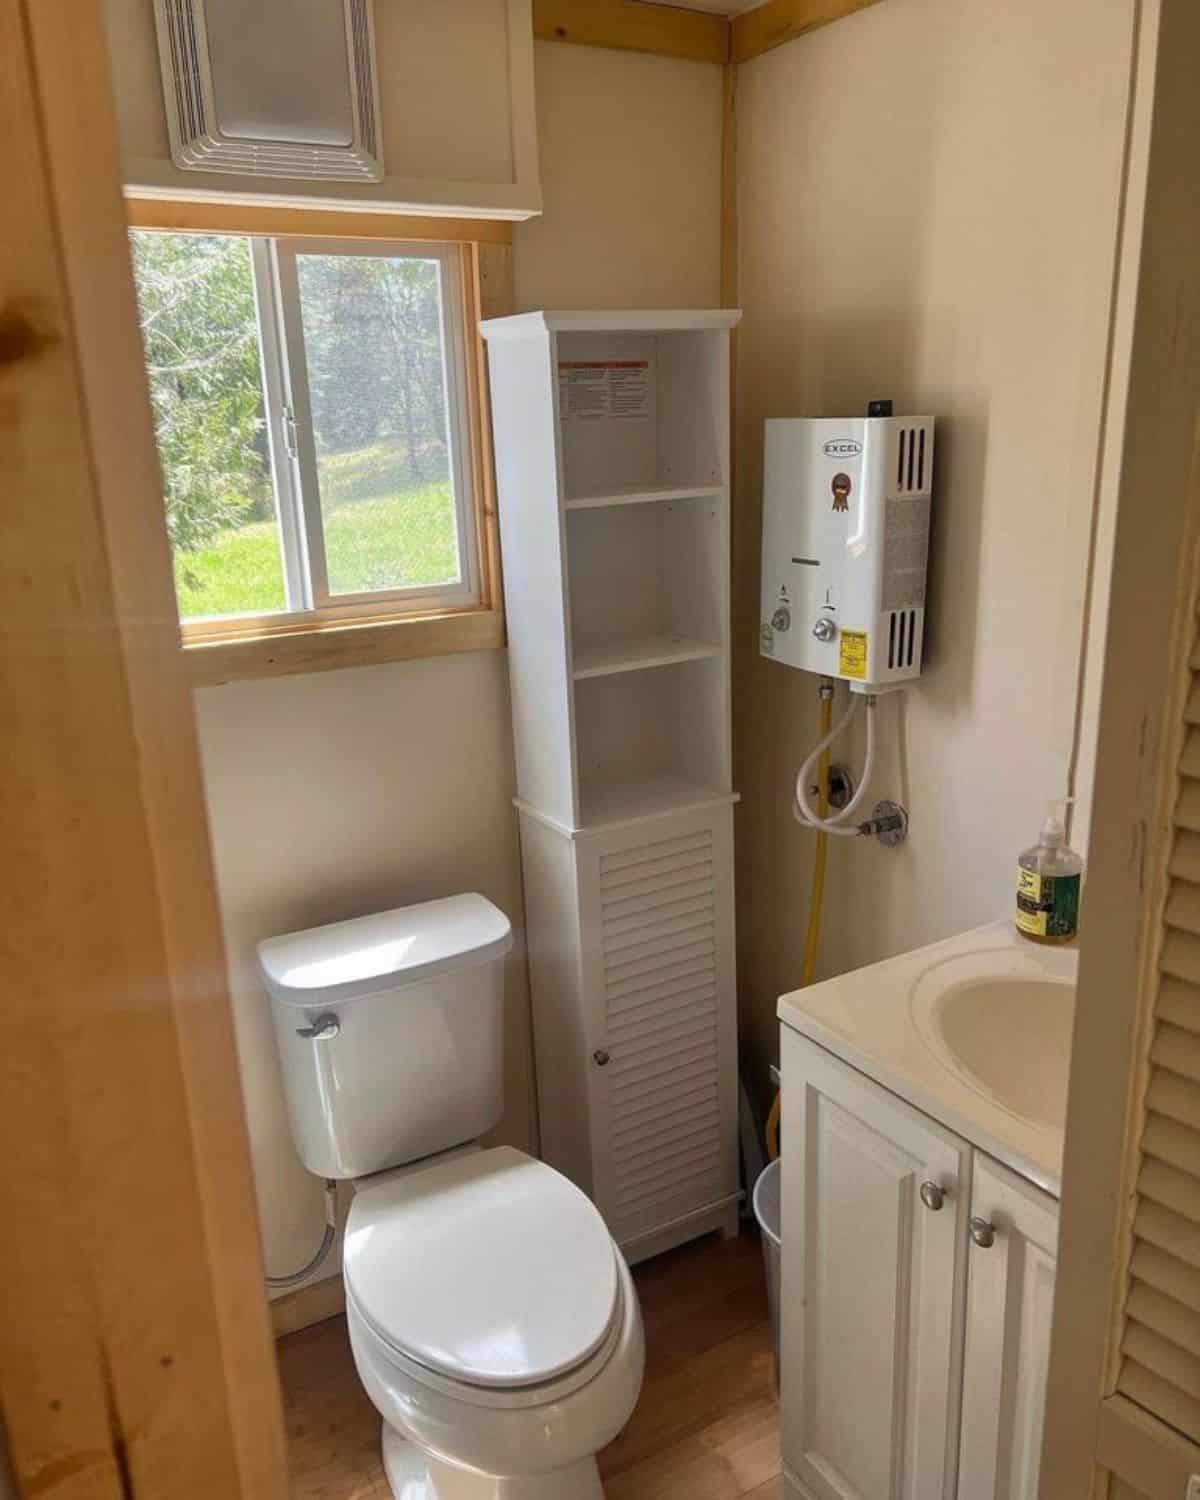 bathroom of beautiful tiny house has all the standard fittings